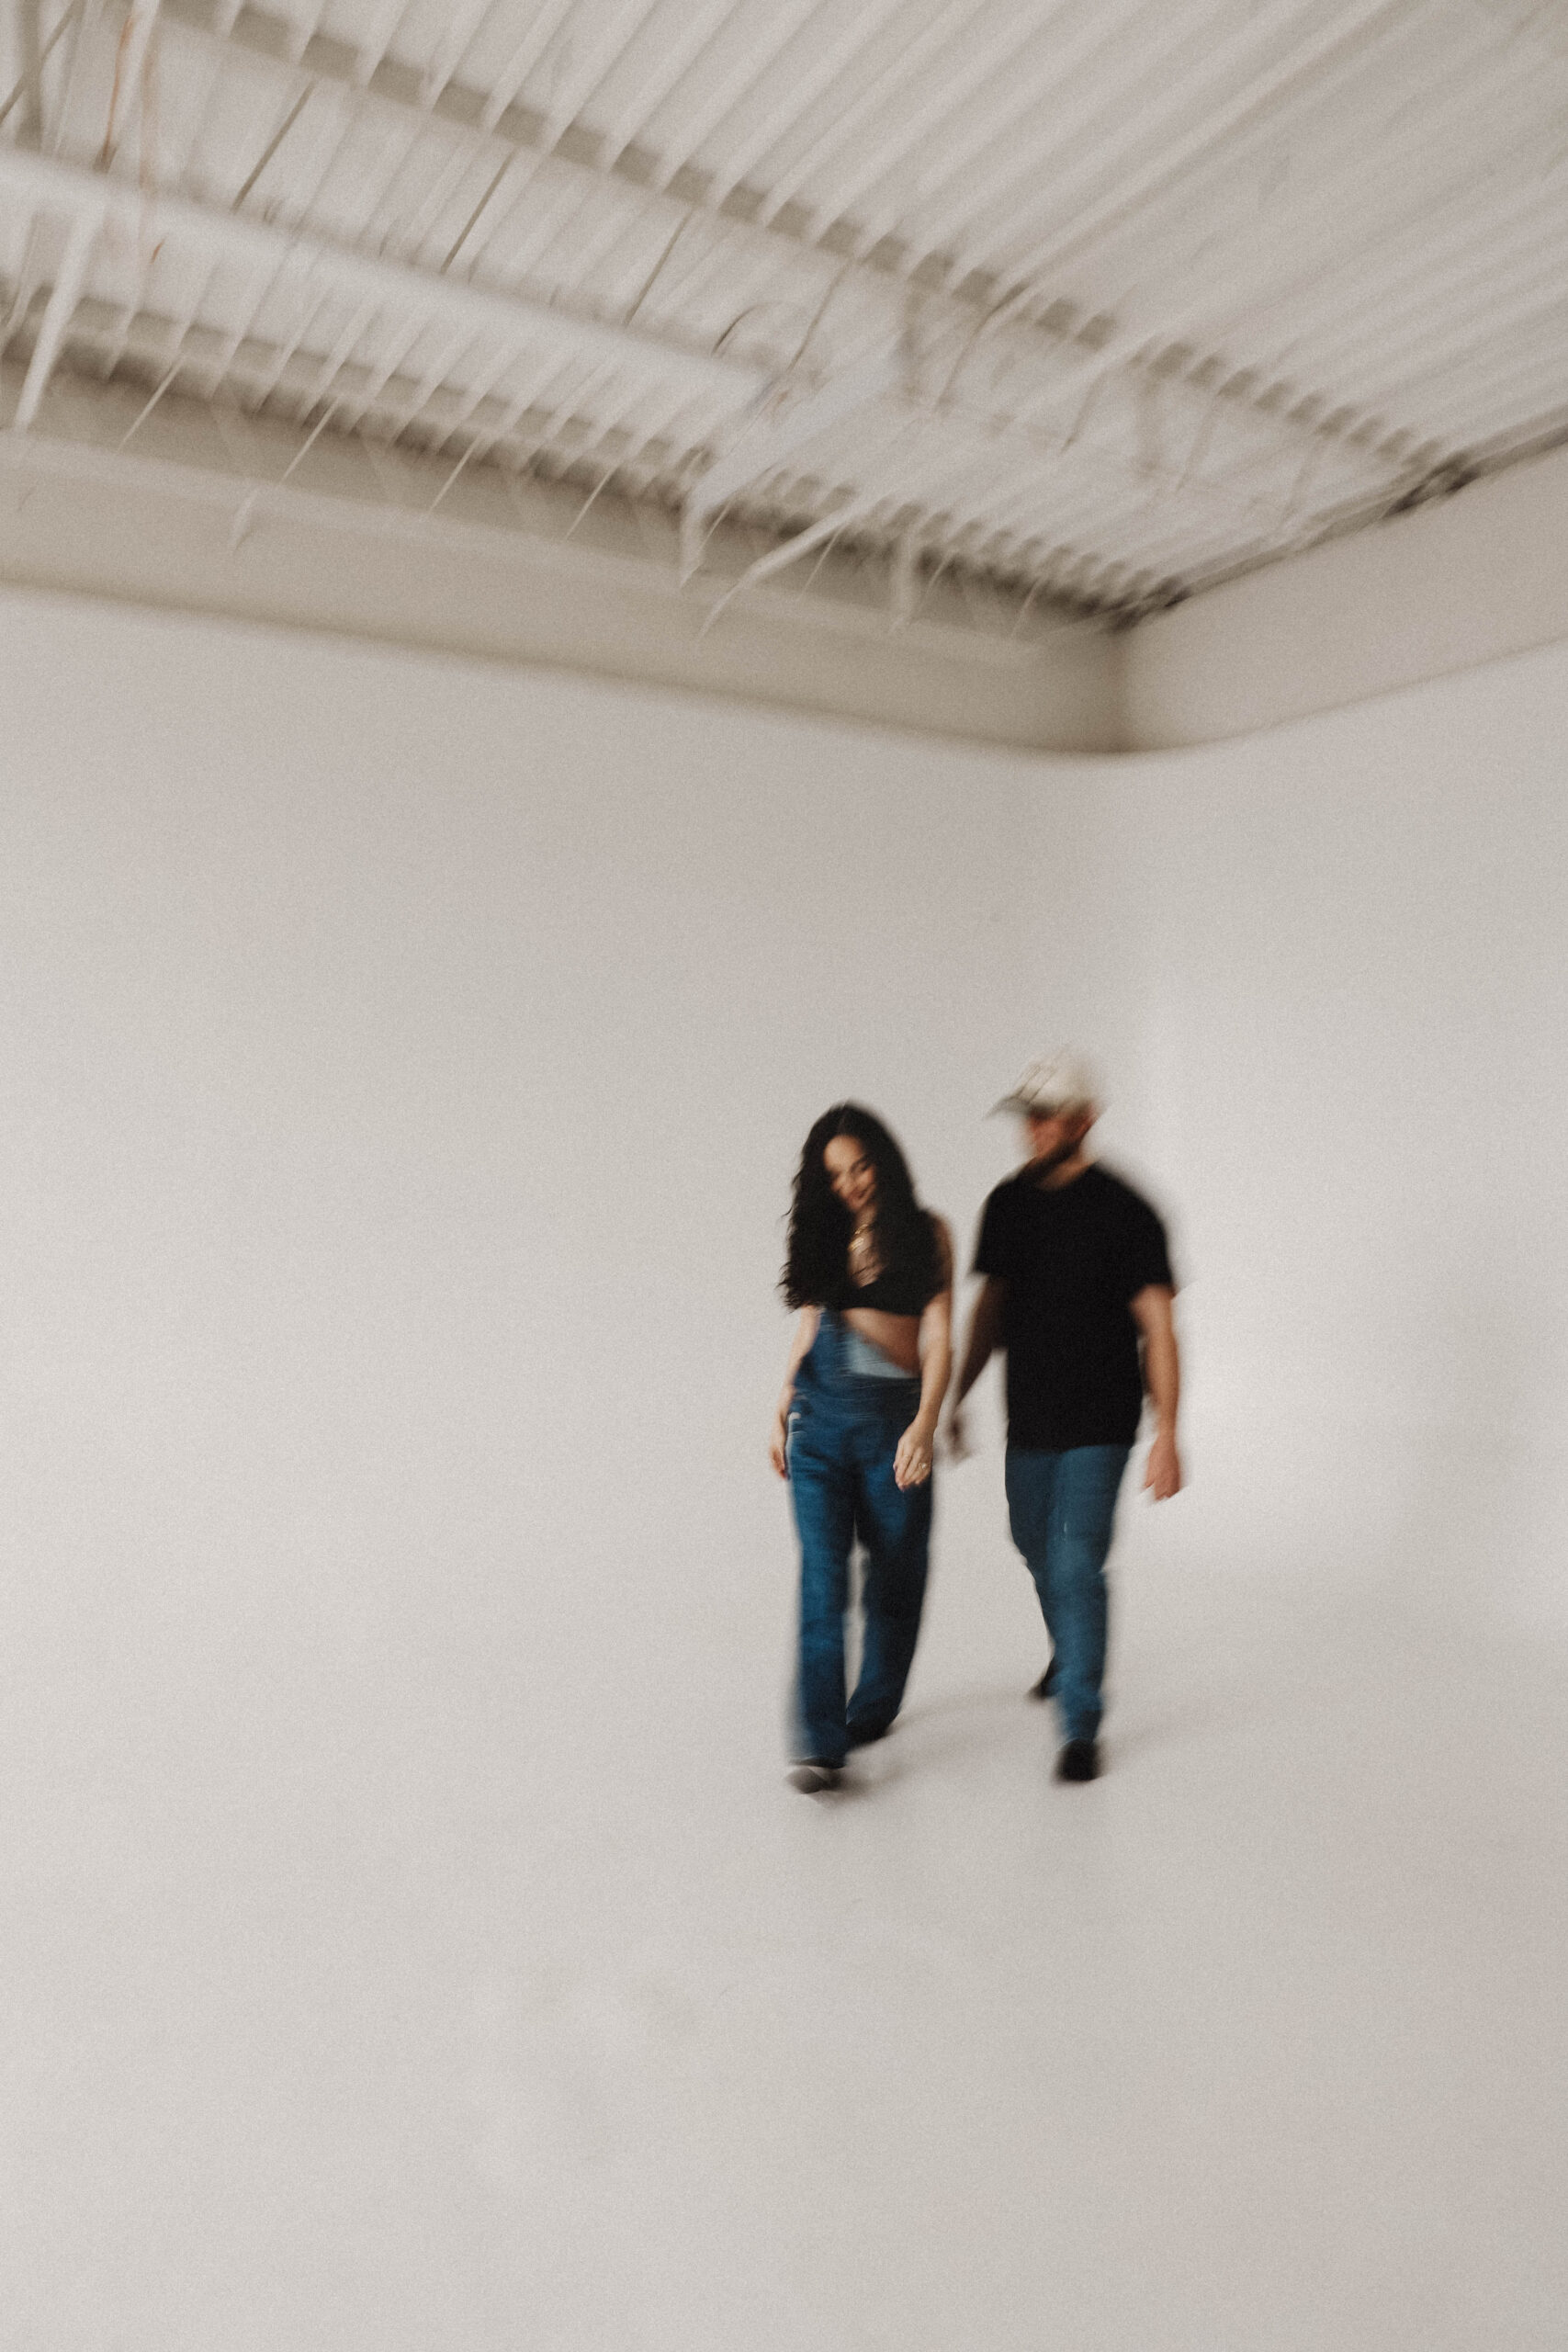 blurry image of soon to be parents holding hands and walking in the studio